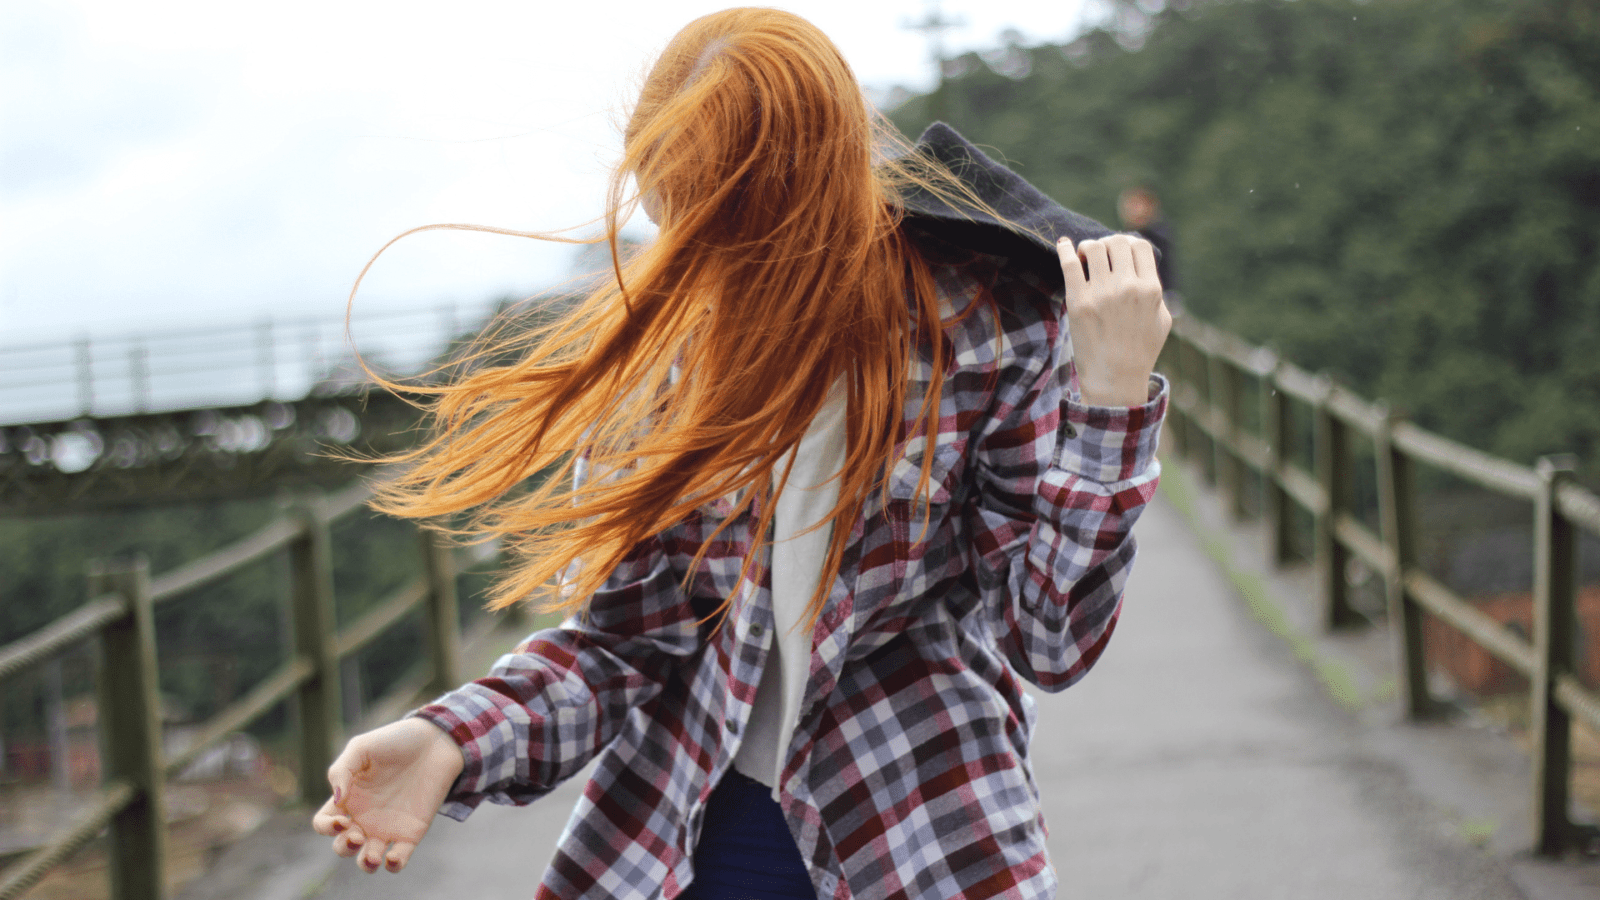 Are Mosquitos More Attracted to Red Hair? The Short Answer Is: Yes